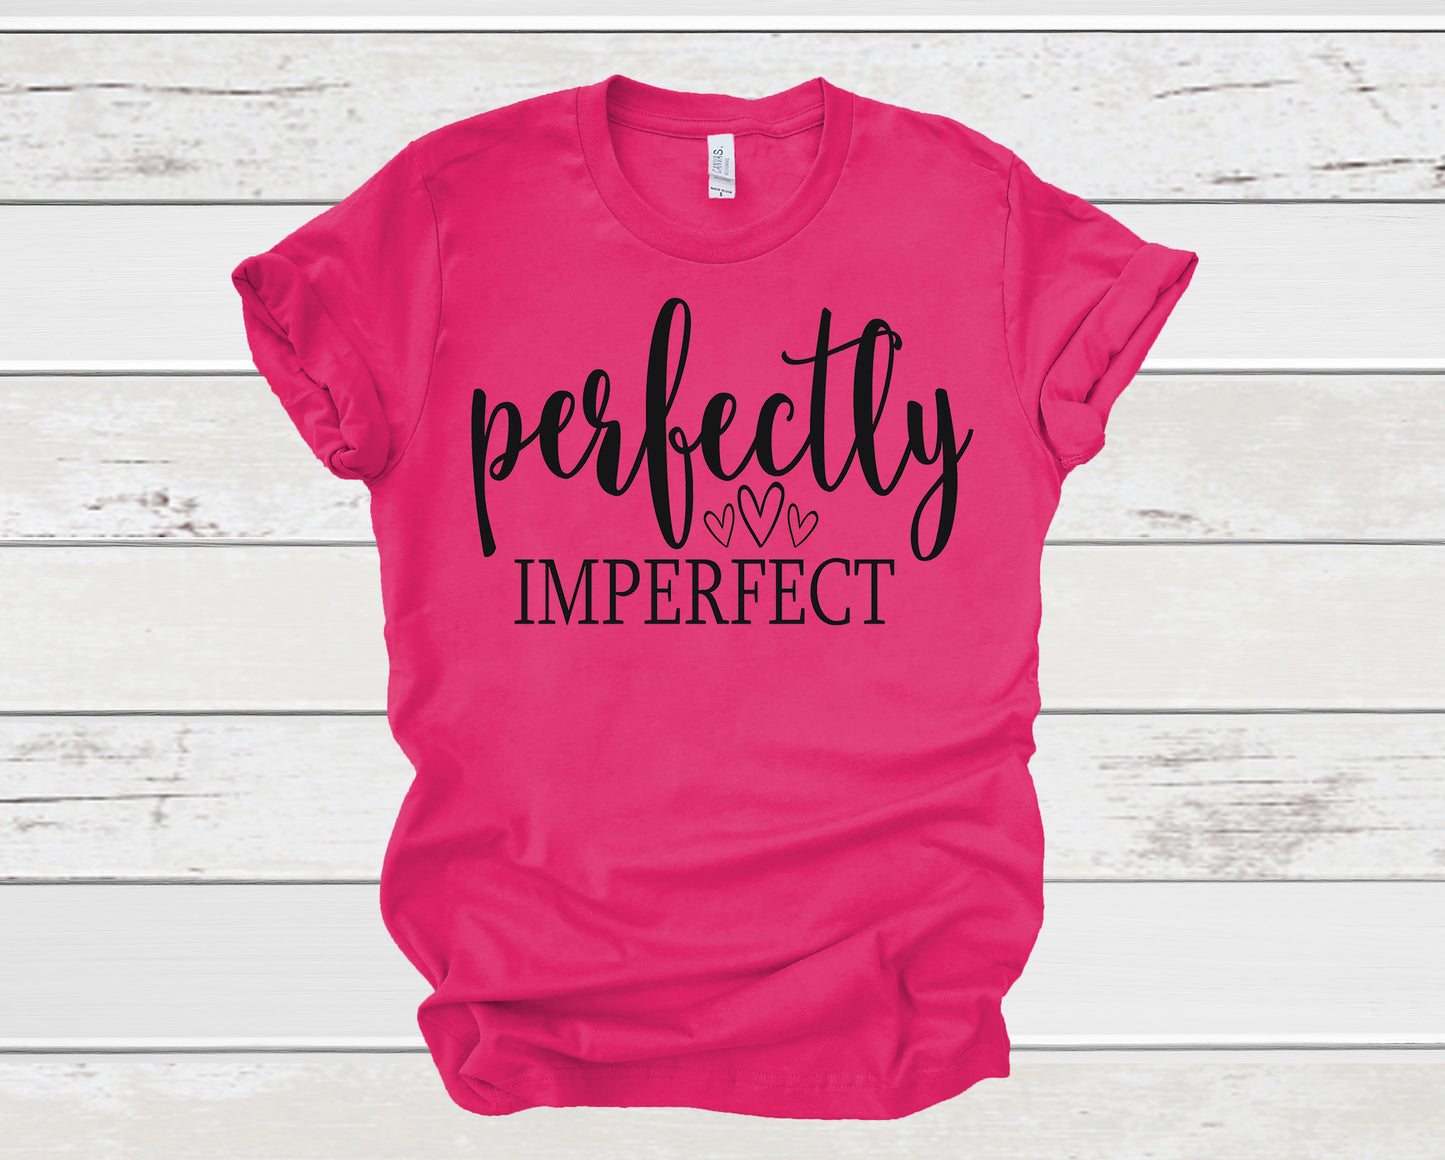 Perfectly imperfect (Black)